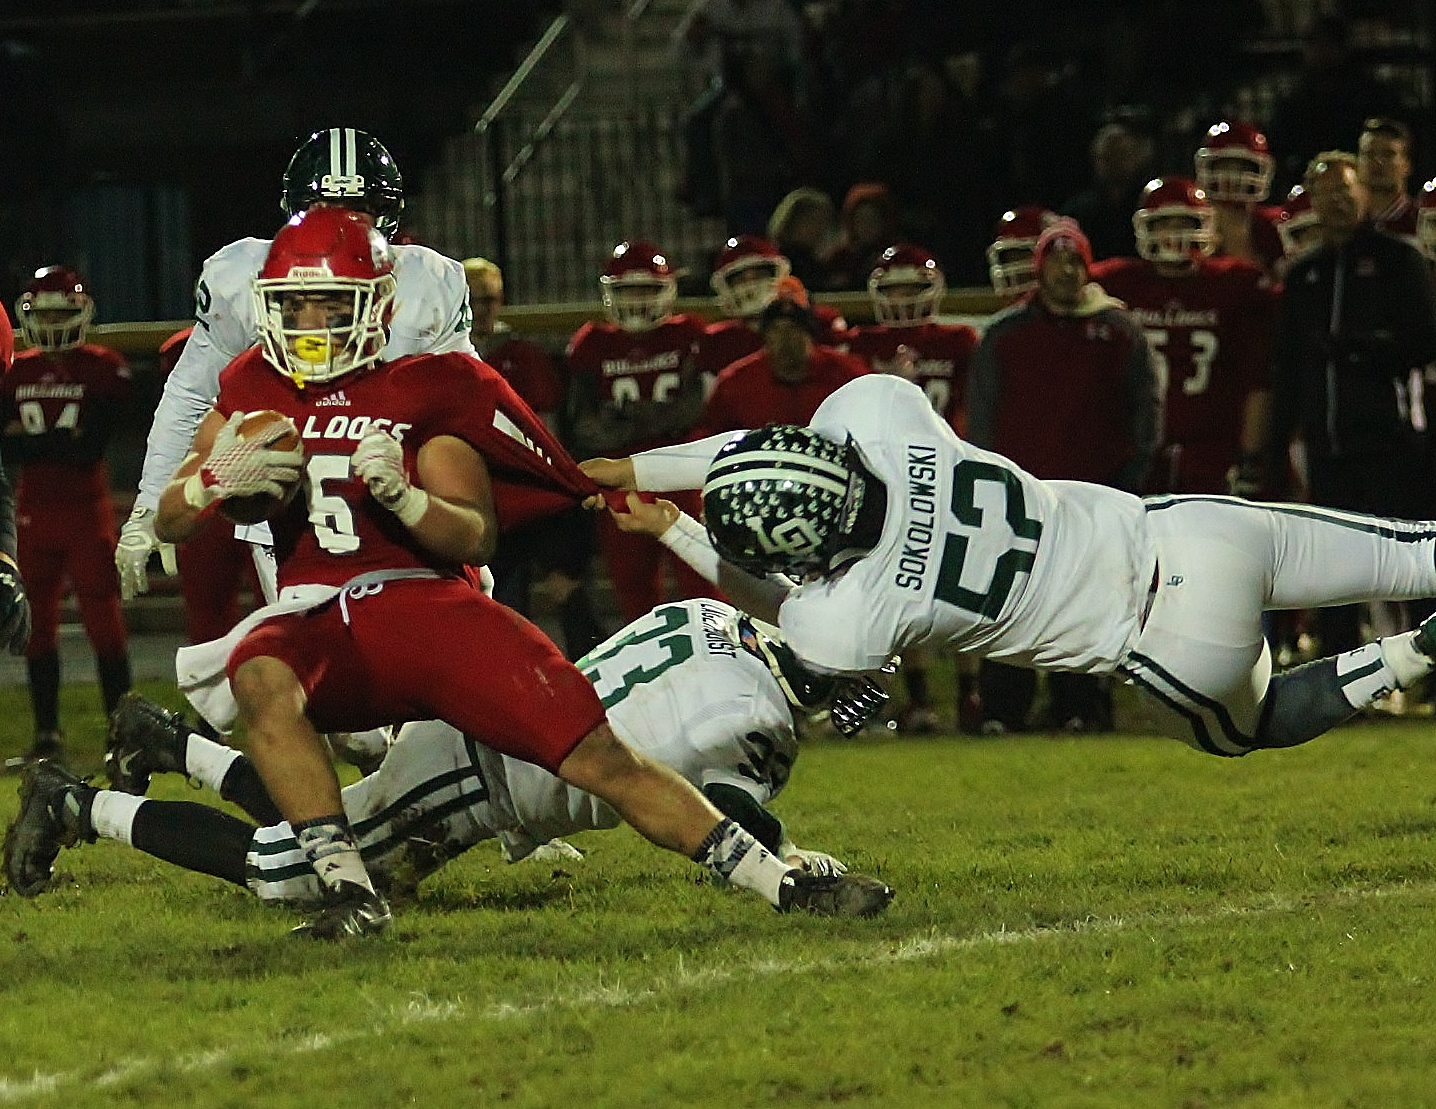 Lake Orion’s football season ends with tough playoff loss to Romeo